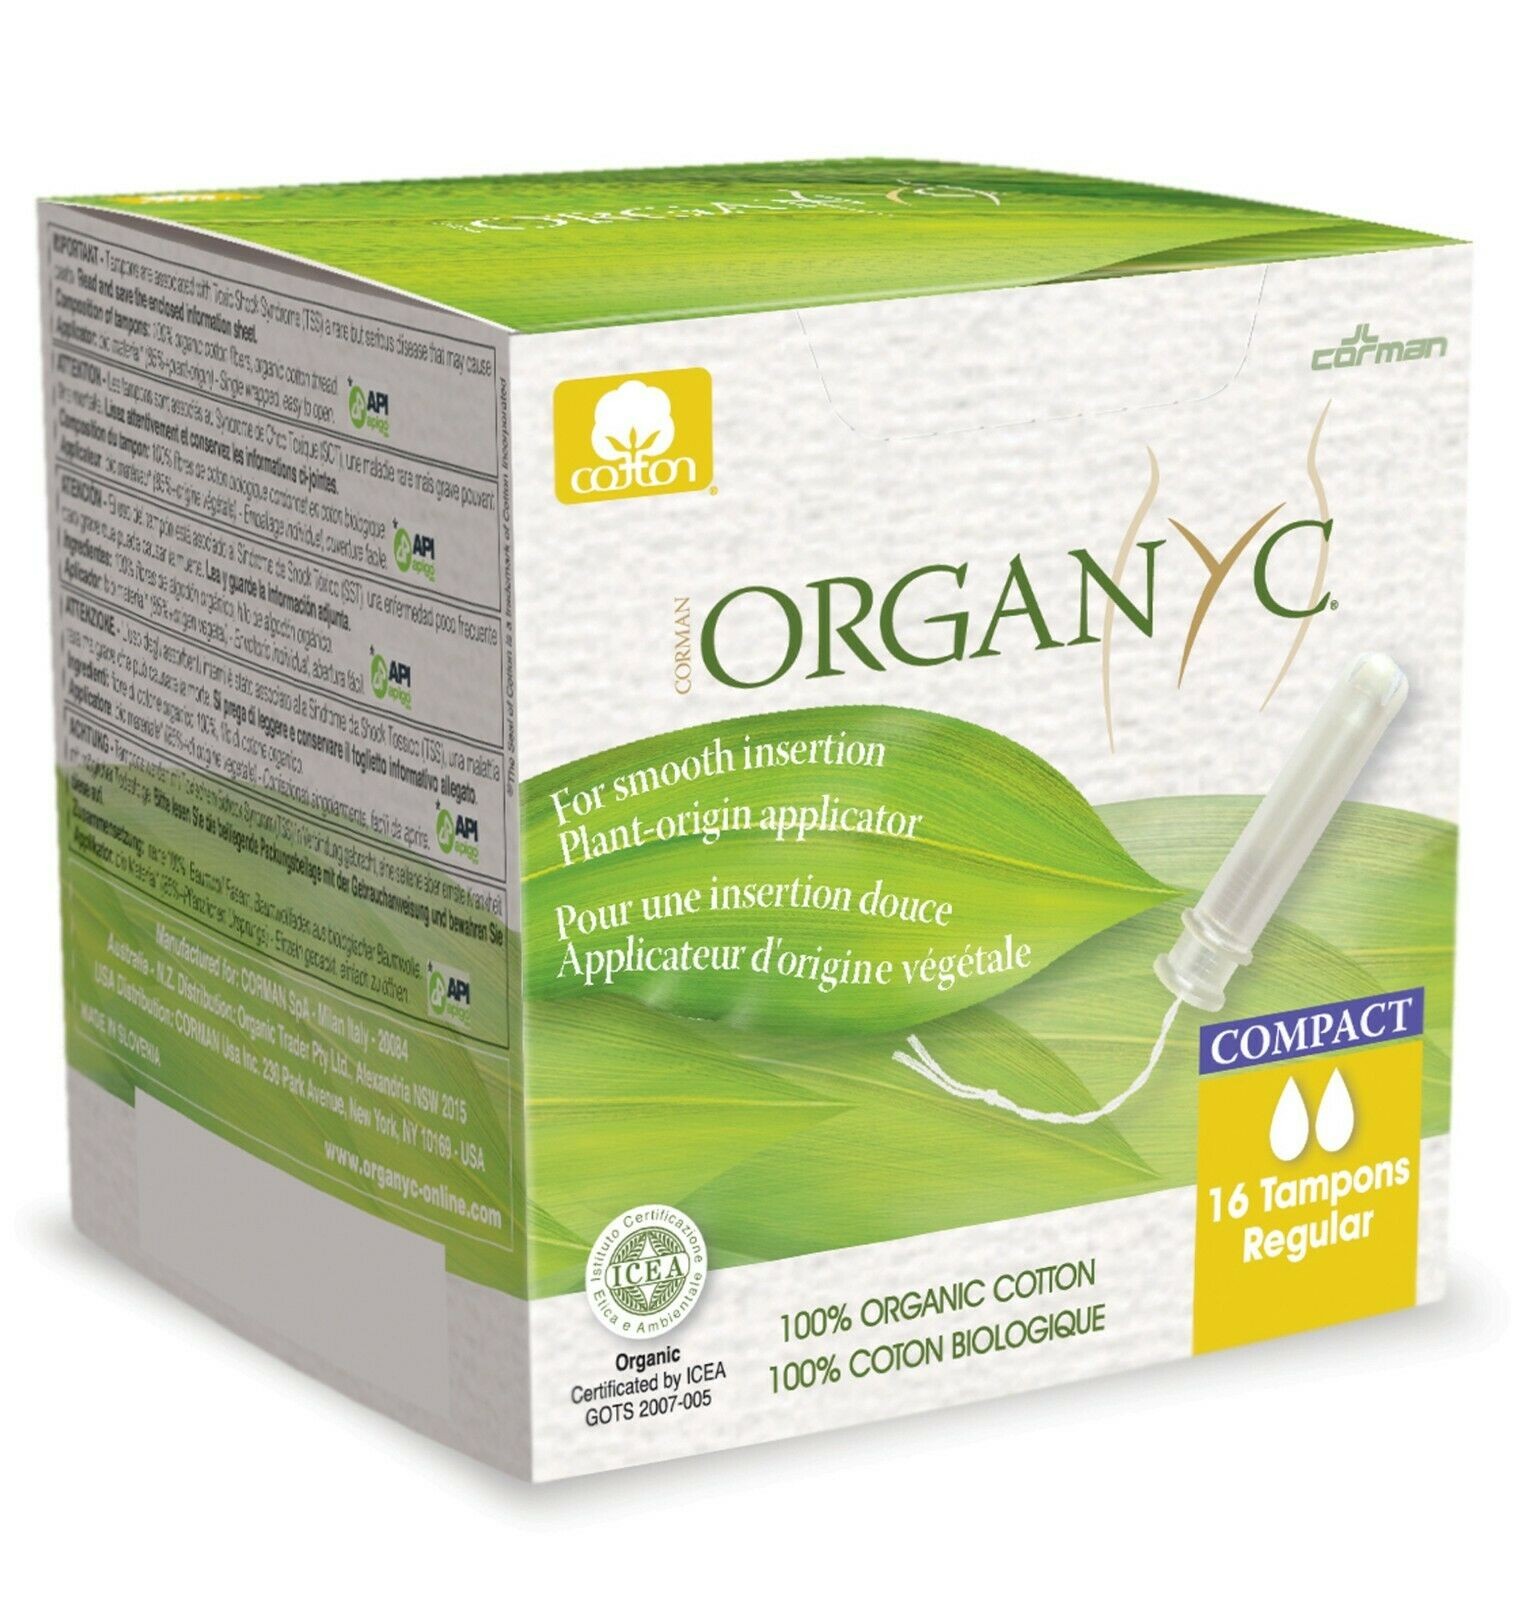 Organyc Compact Tampons Regular with Applicator Organic Cotton 16 x pack